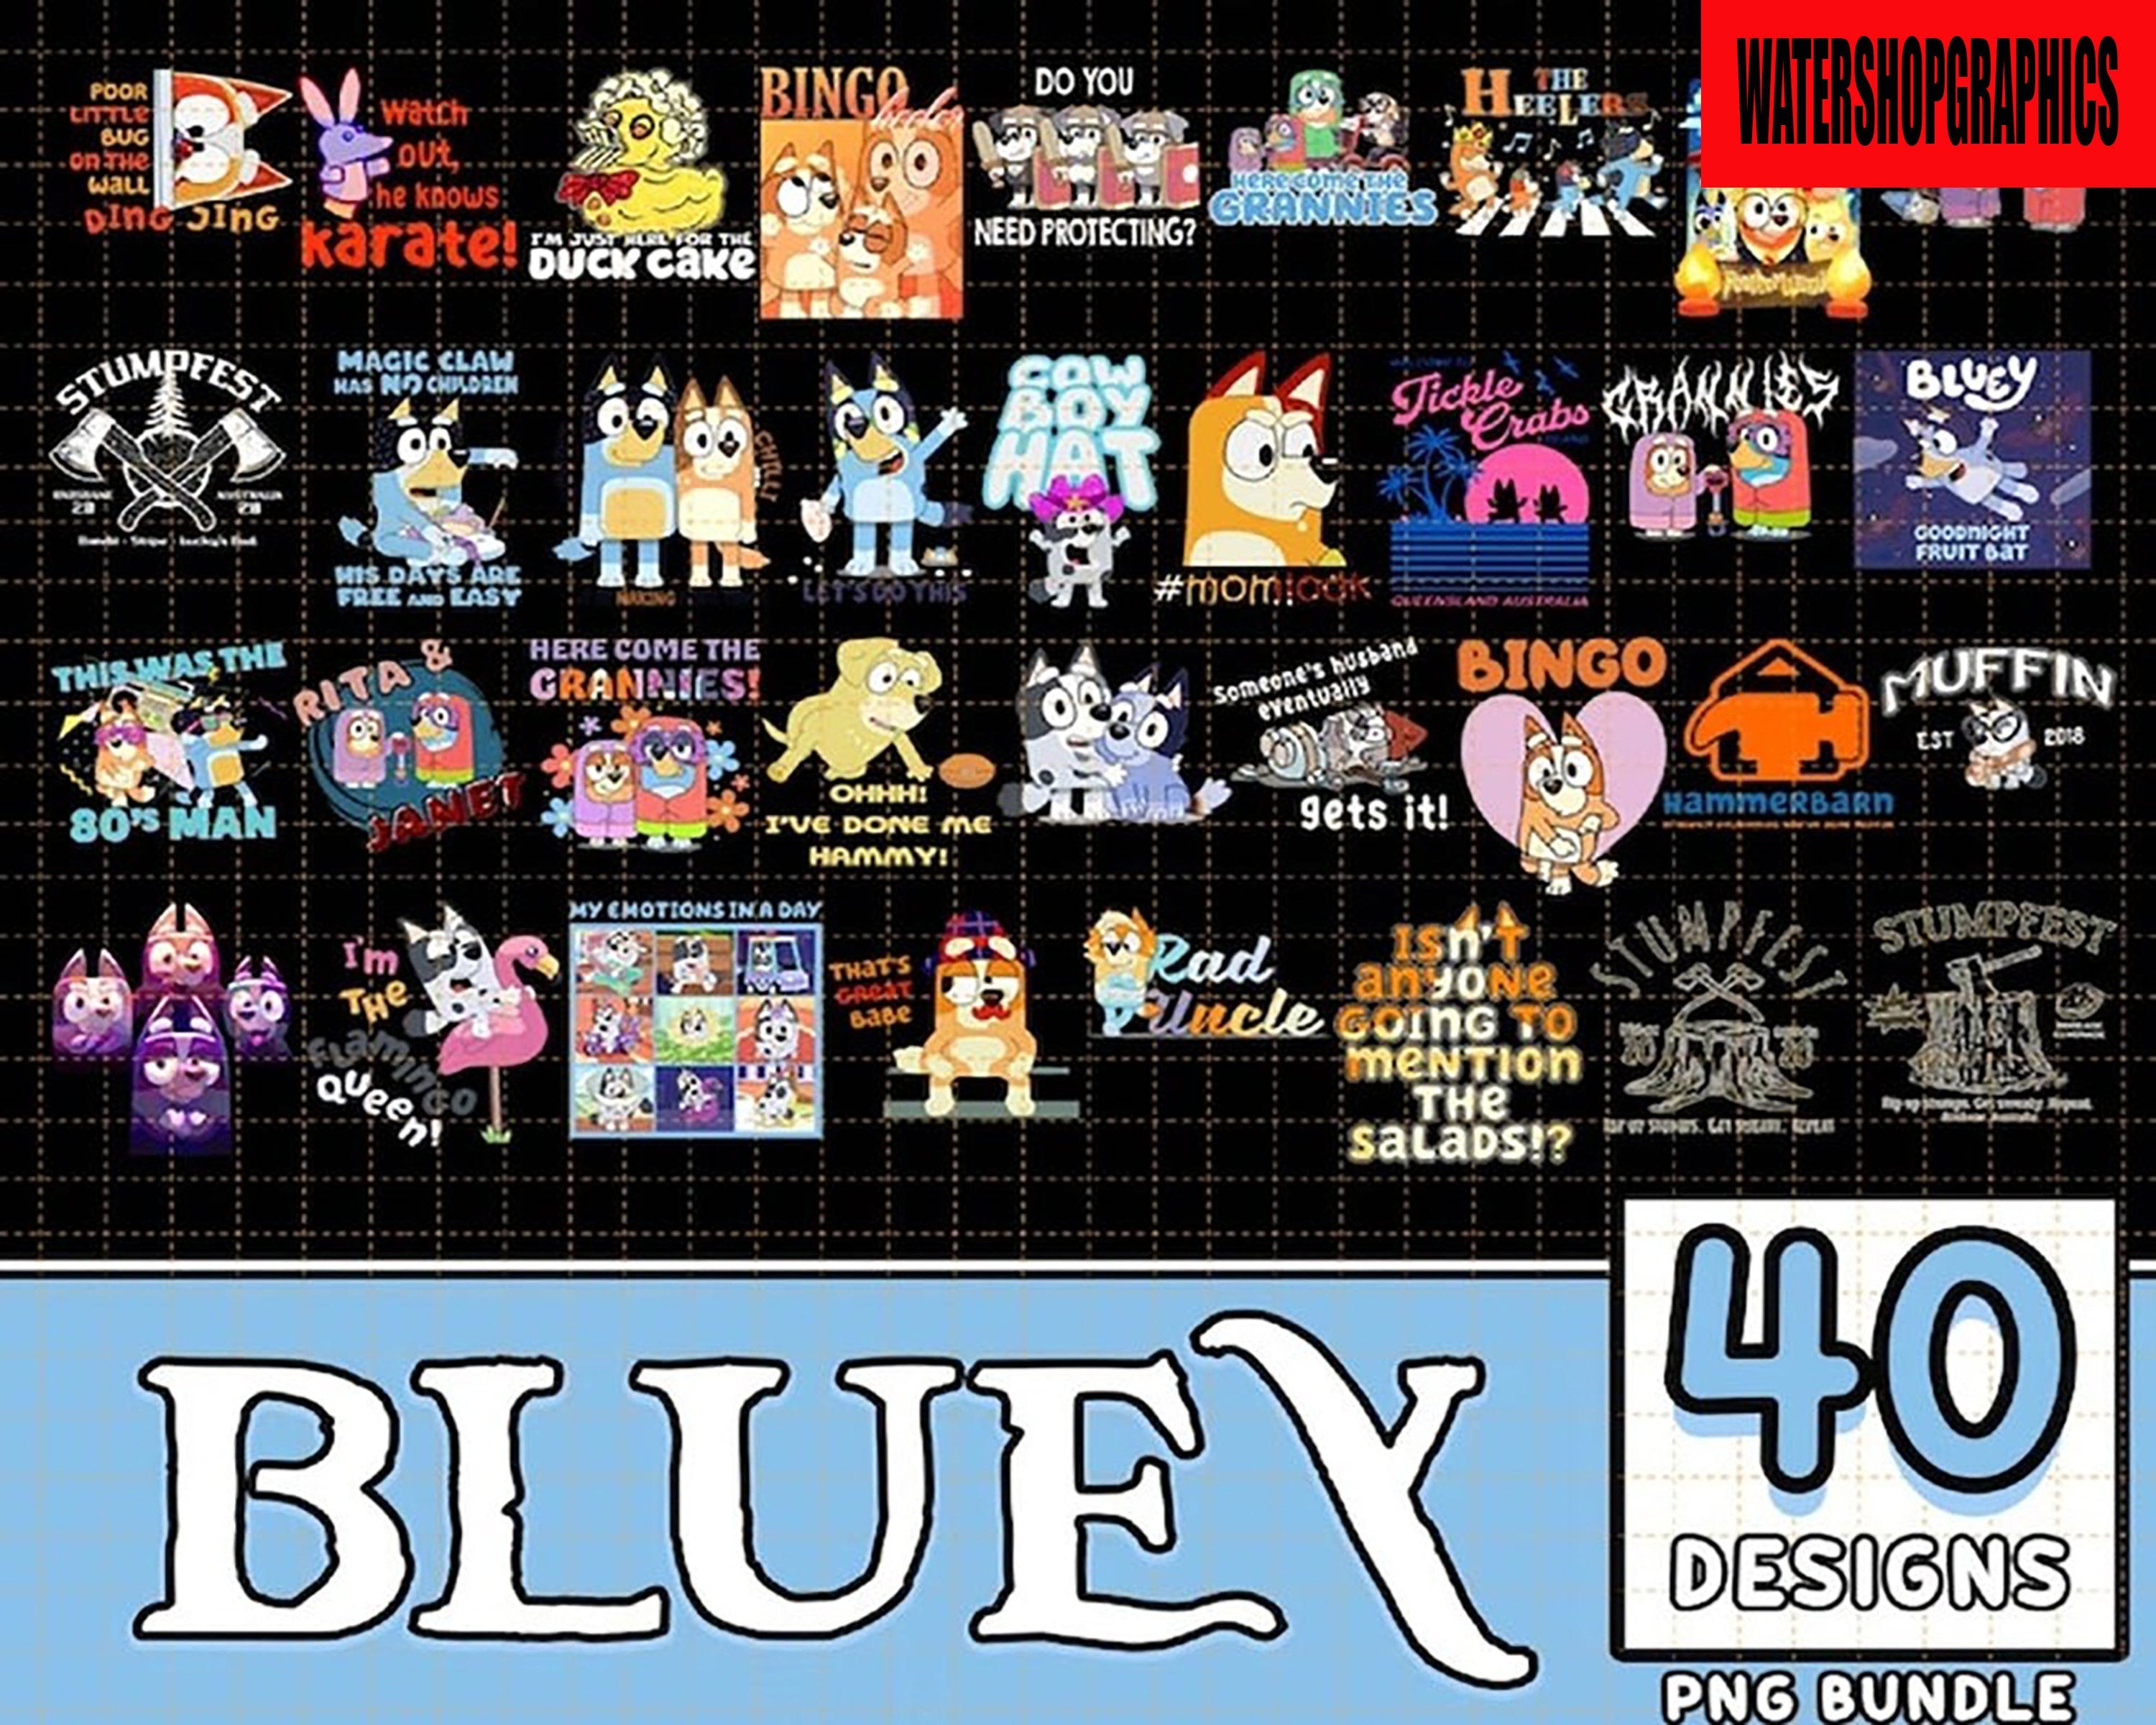 Bundle Bluey PNG, Bluey Characters PNG, Characters Bluey Png, Bluey Png, Funny Bluey Png